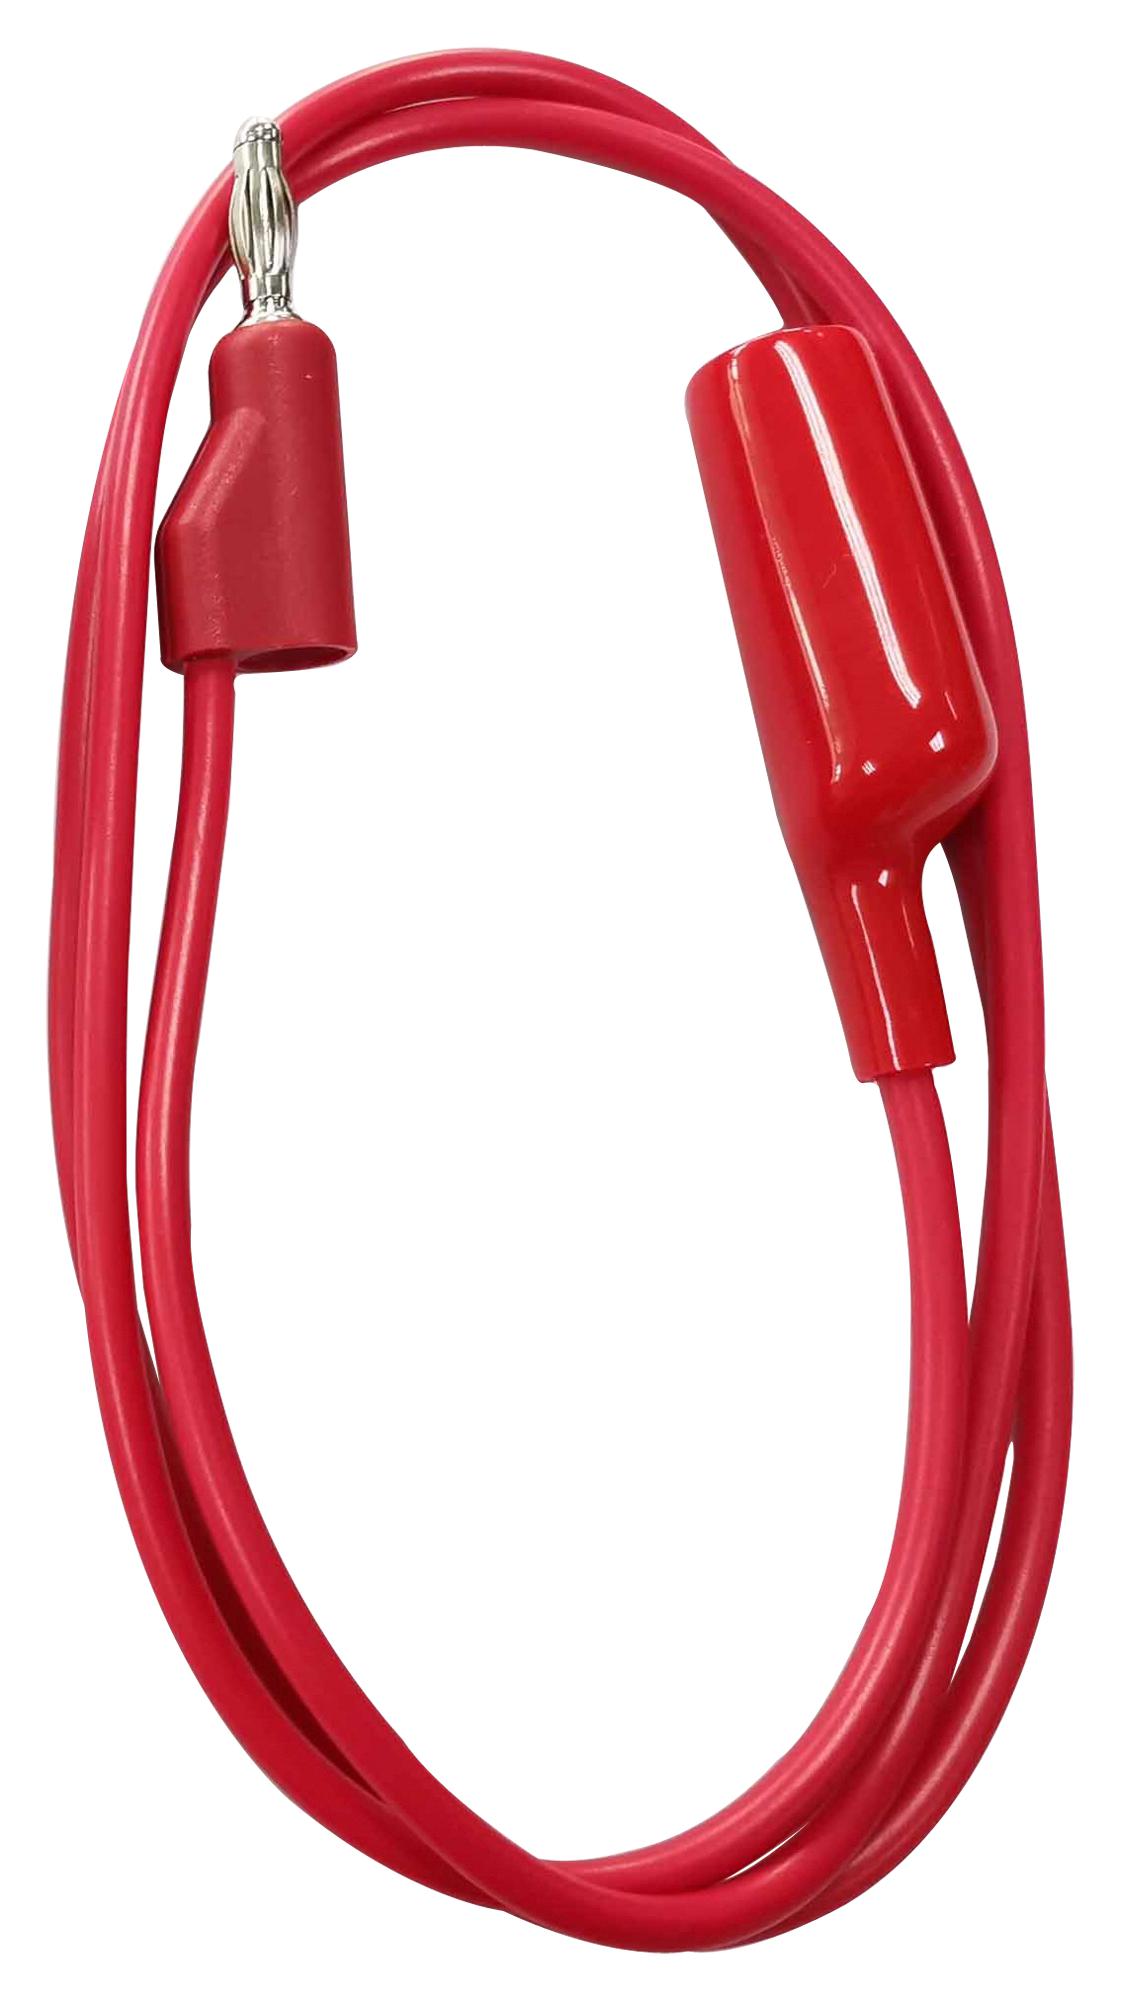 MP770269 TEST LEAD, 10A, 60V, 1.219M, RED MULTICOMP PRO